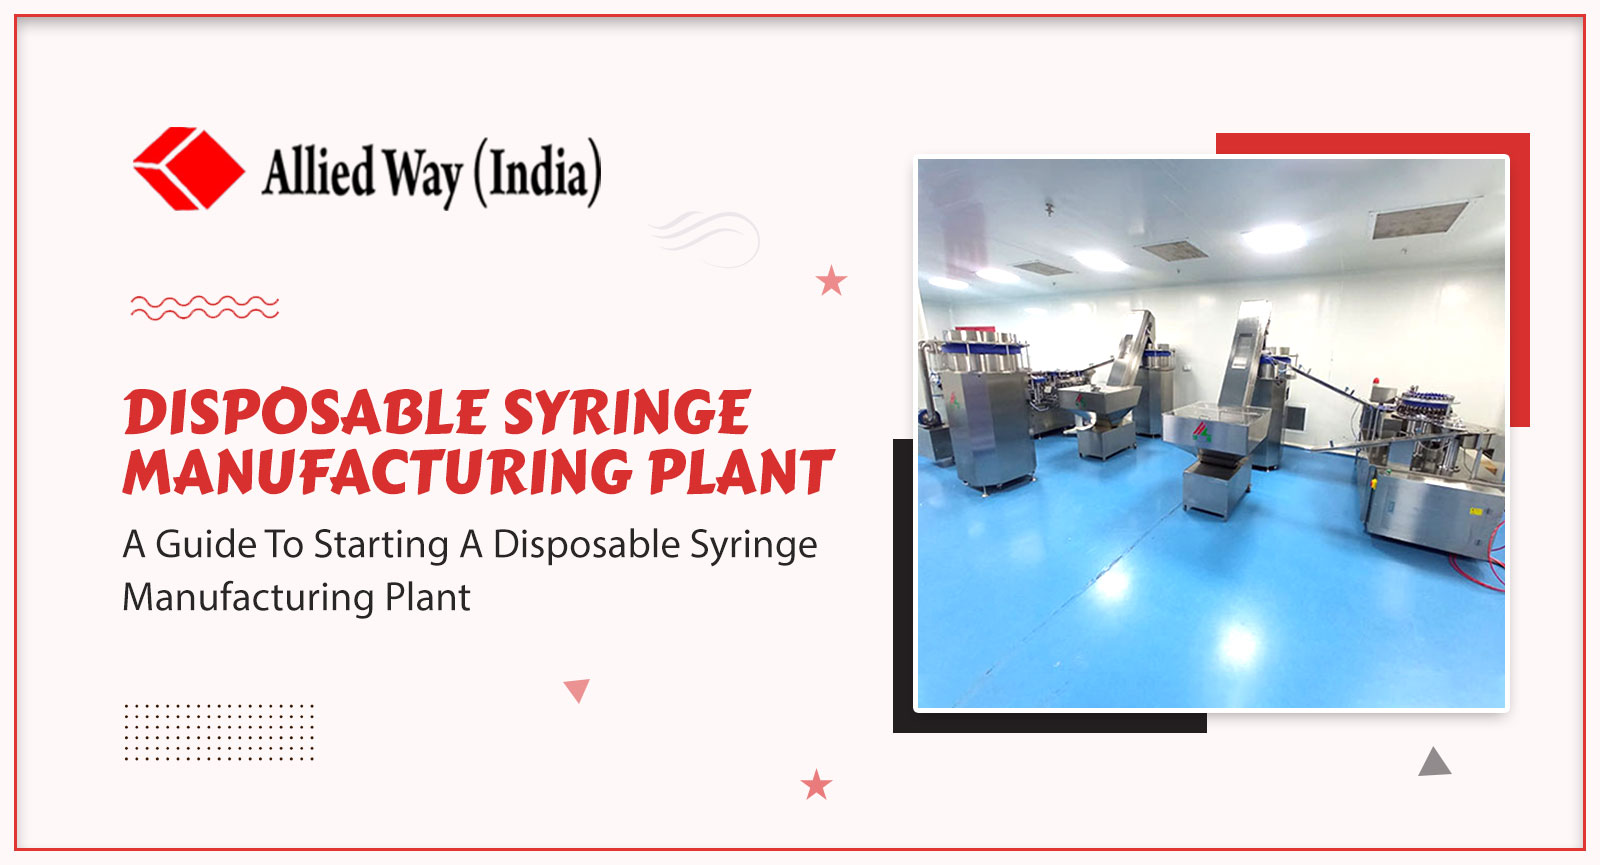 A Guide To Starting A Disposable Syringe Manufacturing Plant, AlliedWay (India)